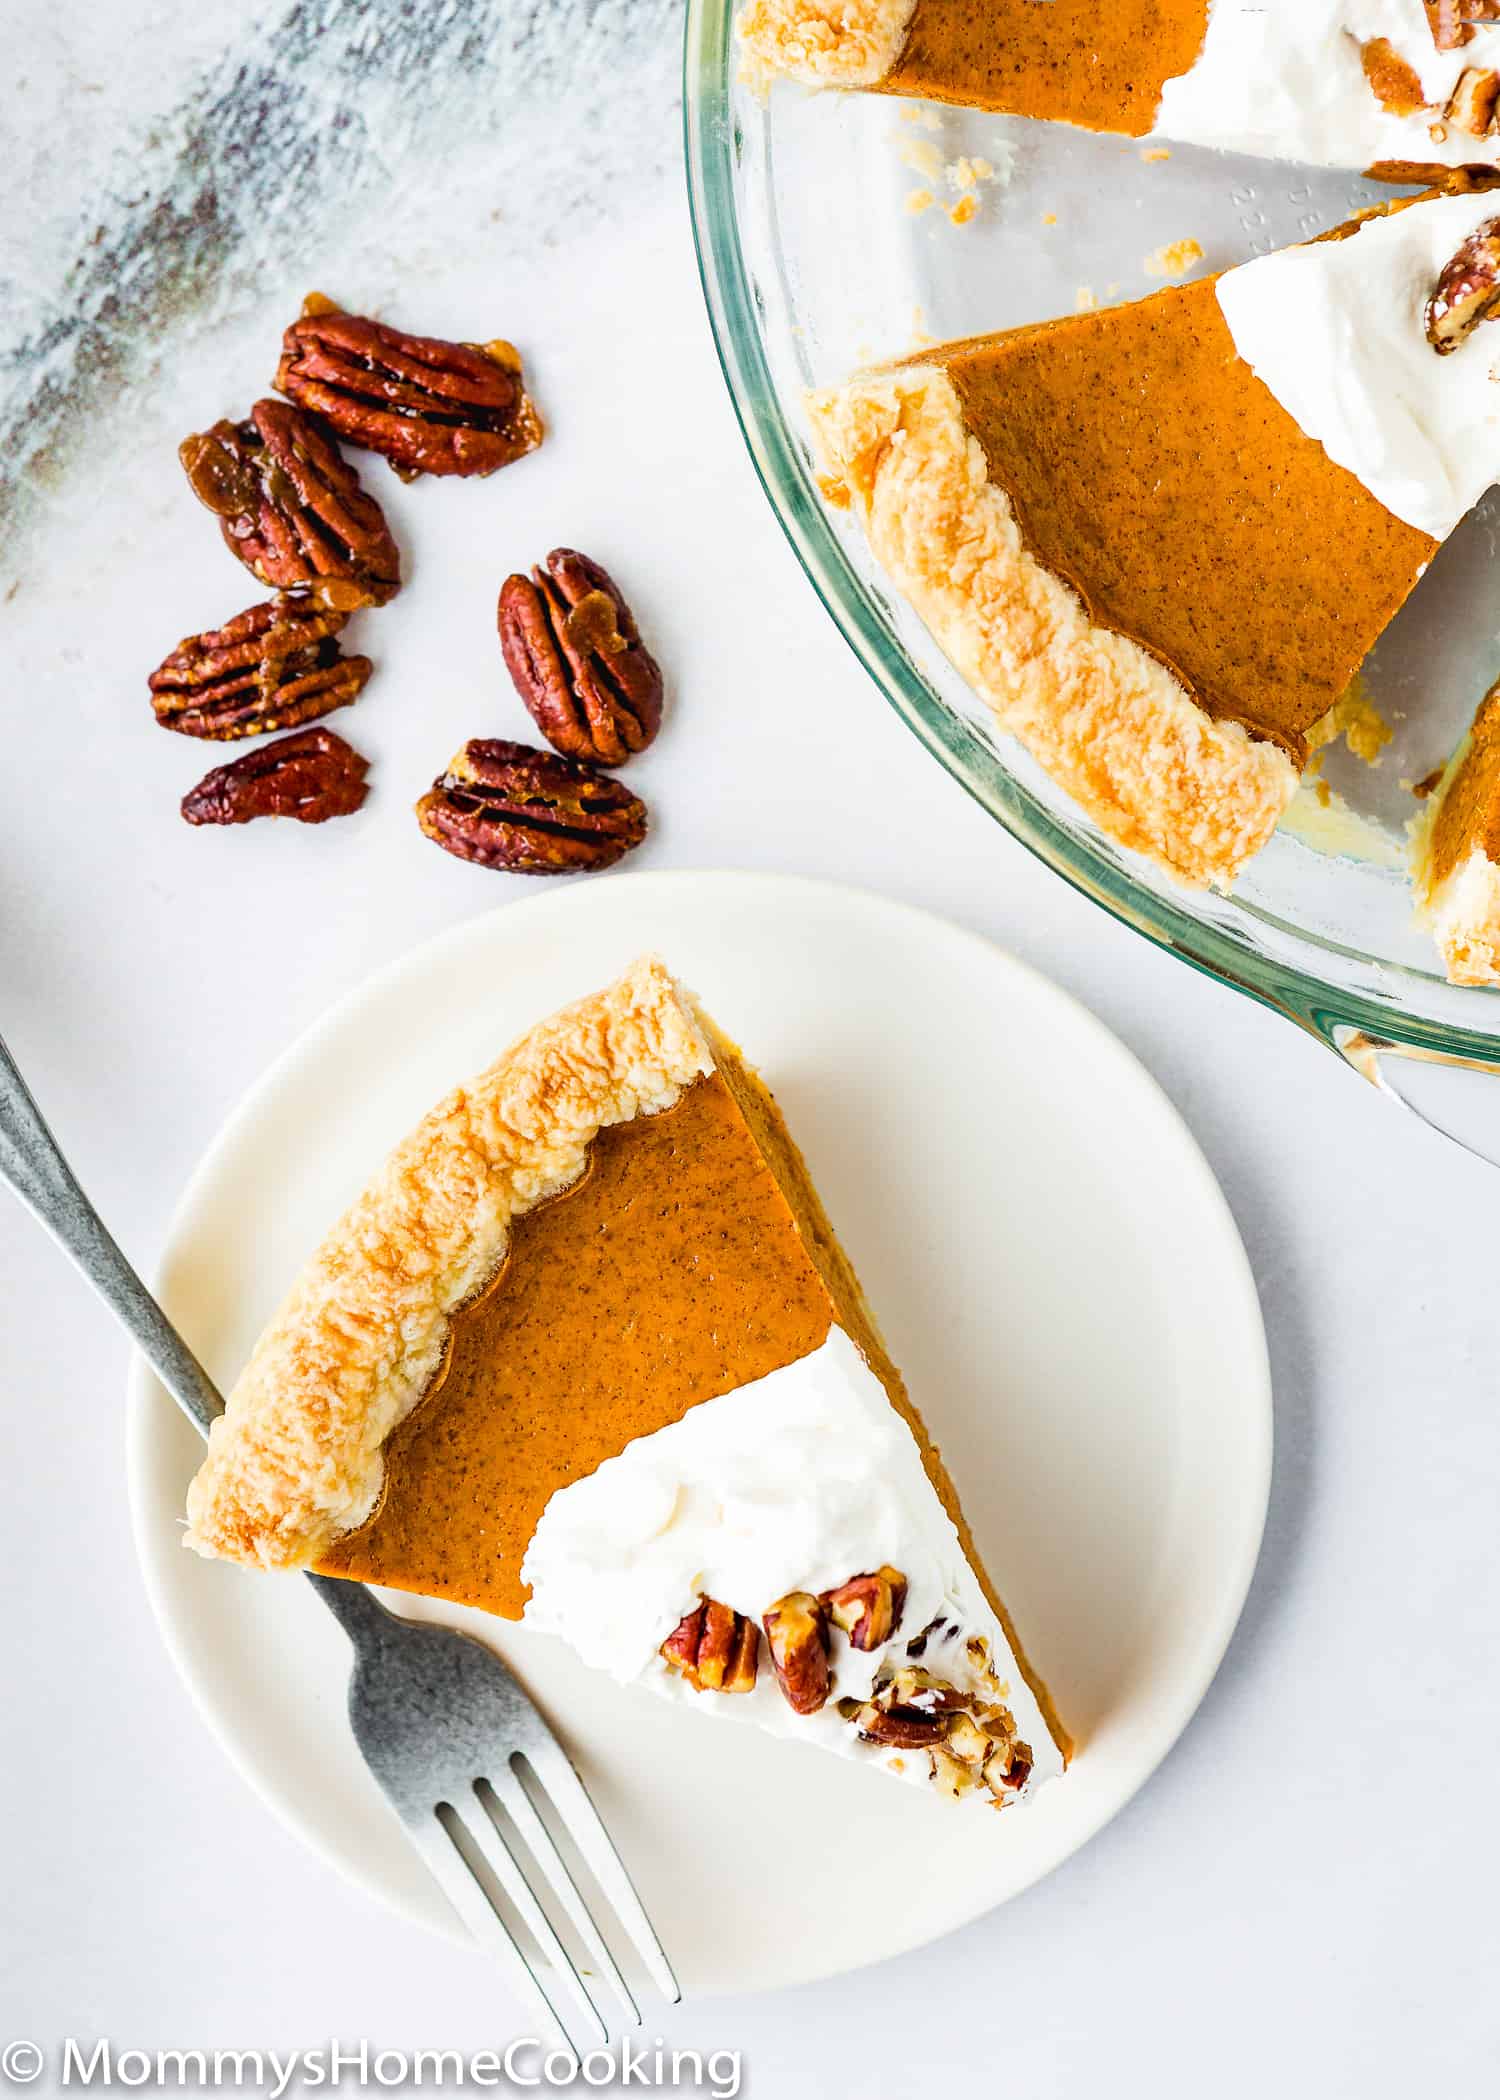 ggless sweet potato pie slice with whipped cream and candied pecans in a plate